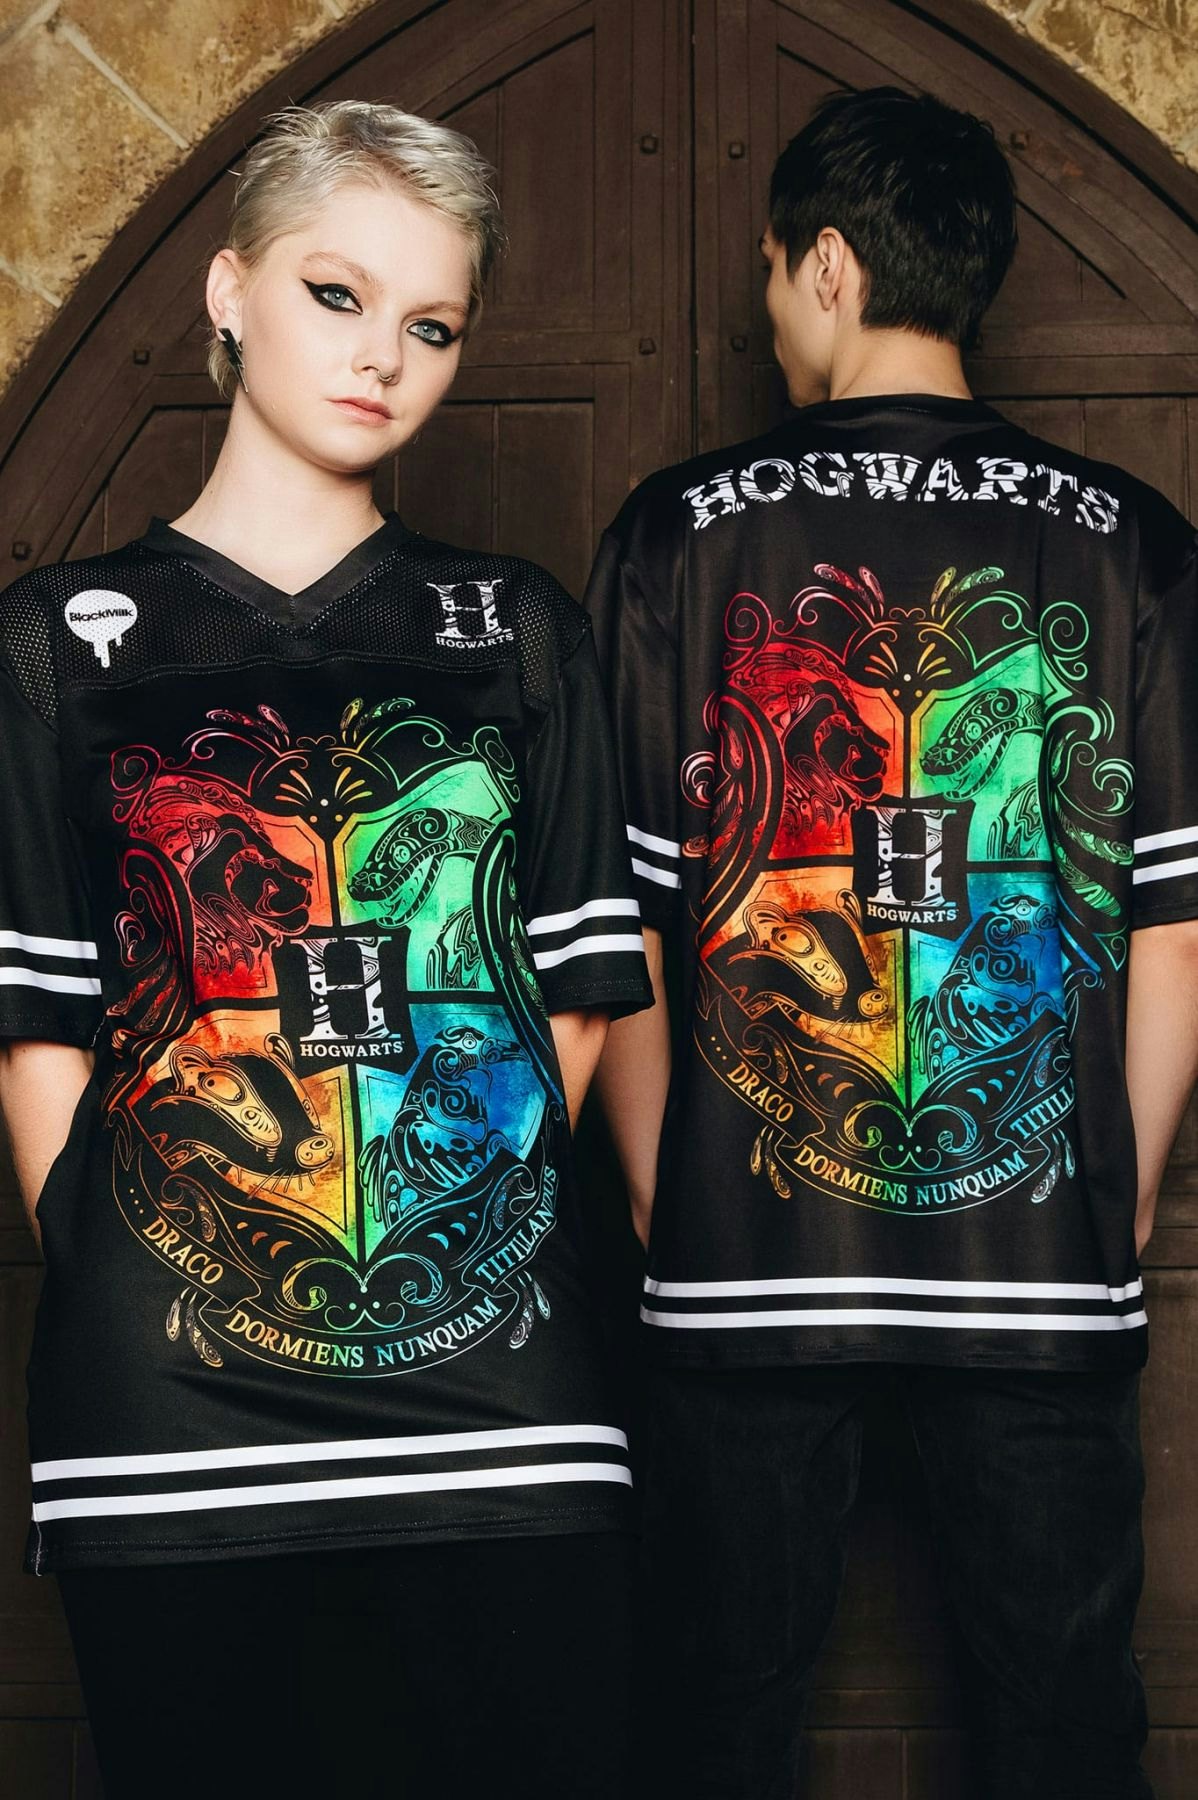 BlackMilk Clothing Debuts All-New Harry Potter Collection